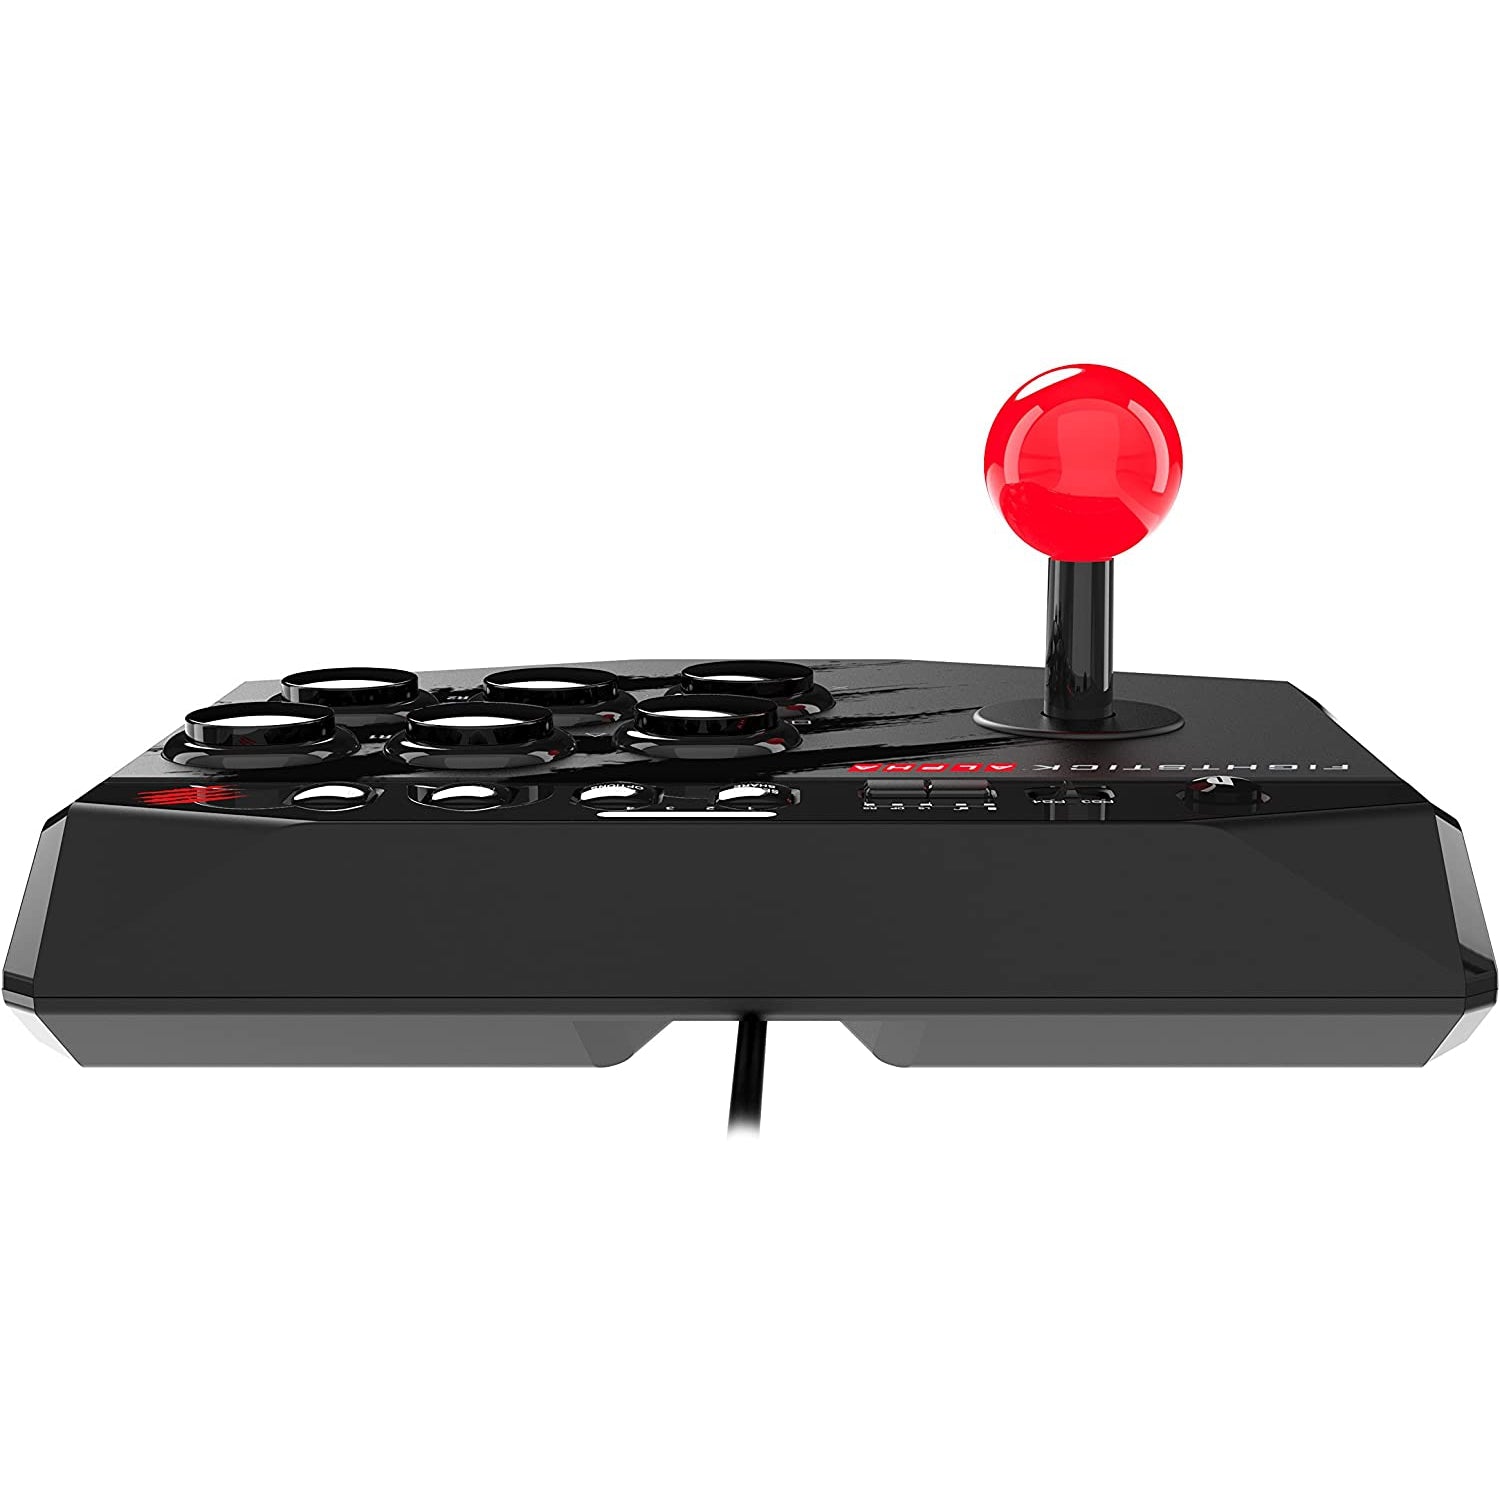 MAD CATZ Arcade Stick FightStick Alpha for PS4 / PS3